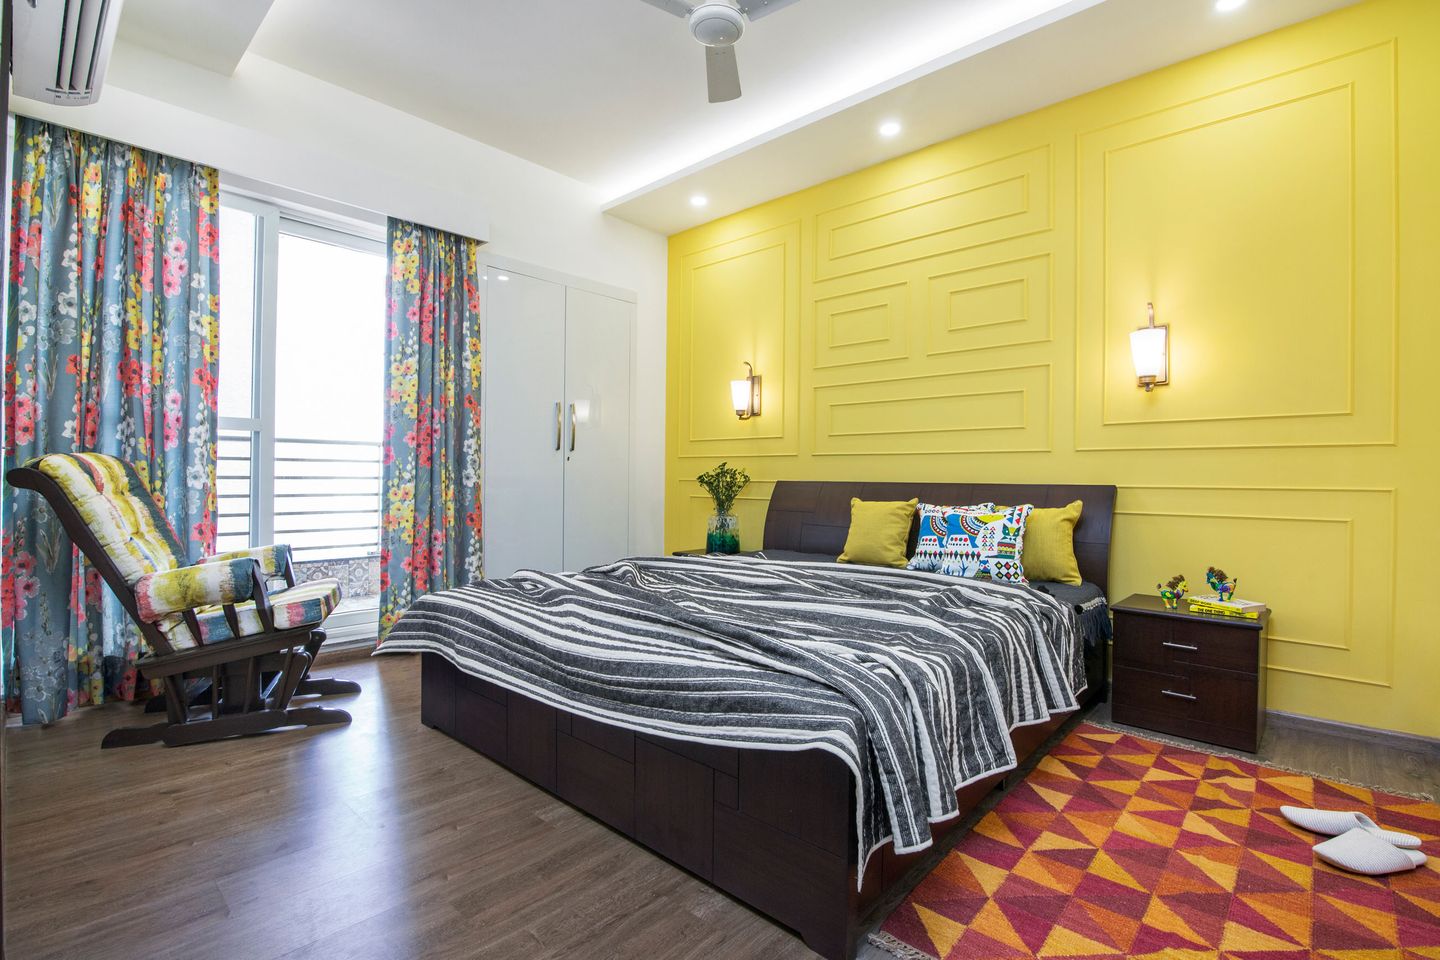 12X9 Ft Guest Room Design With Yellow Accent Wall - Livspace